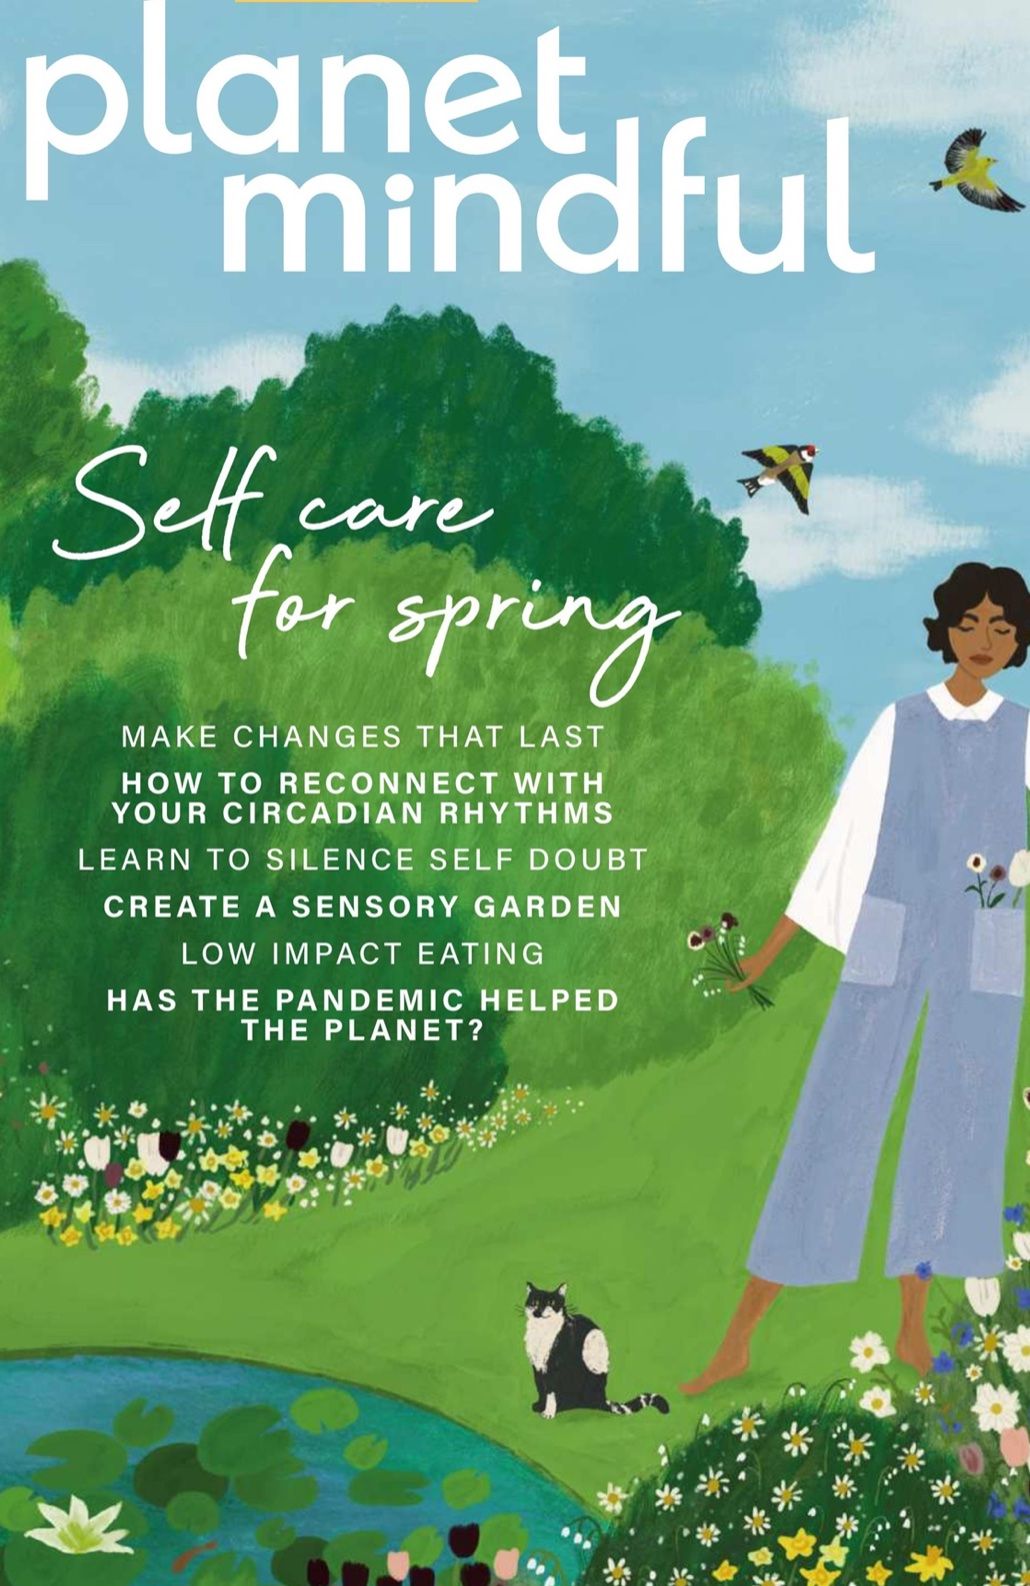 Screenshot showing front cover of Planet Mindful magazine